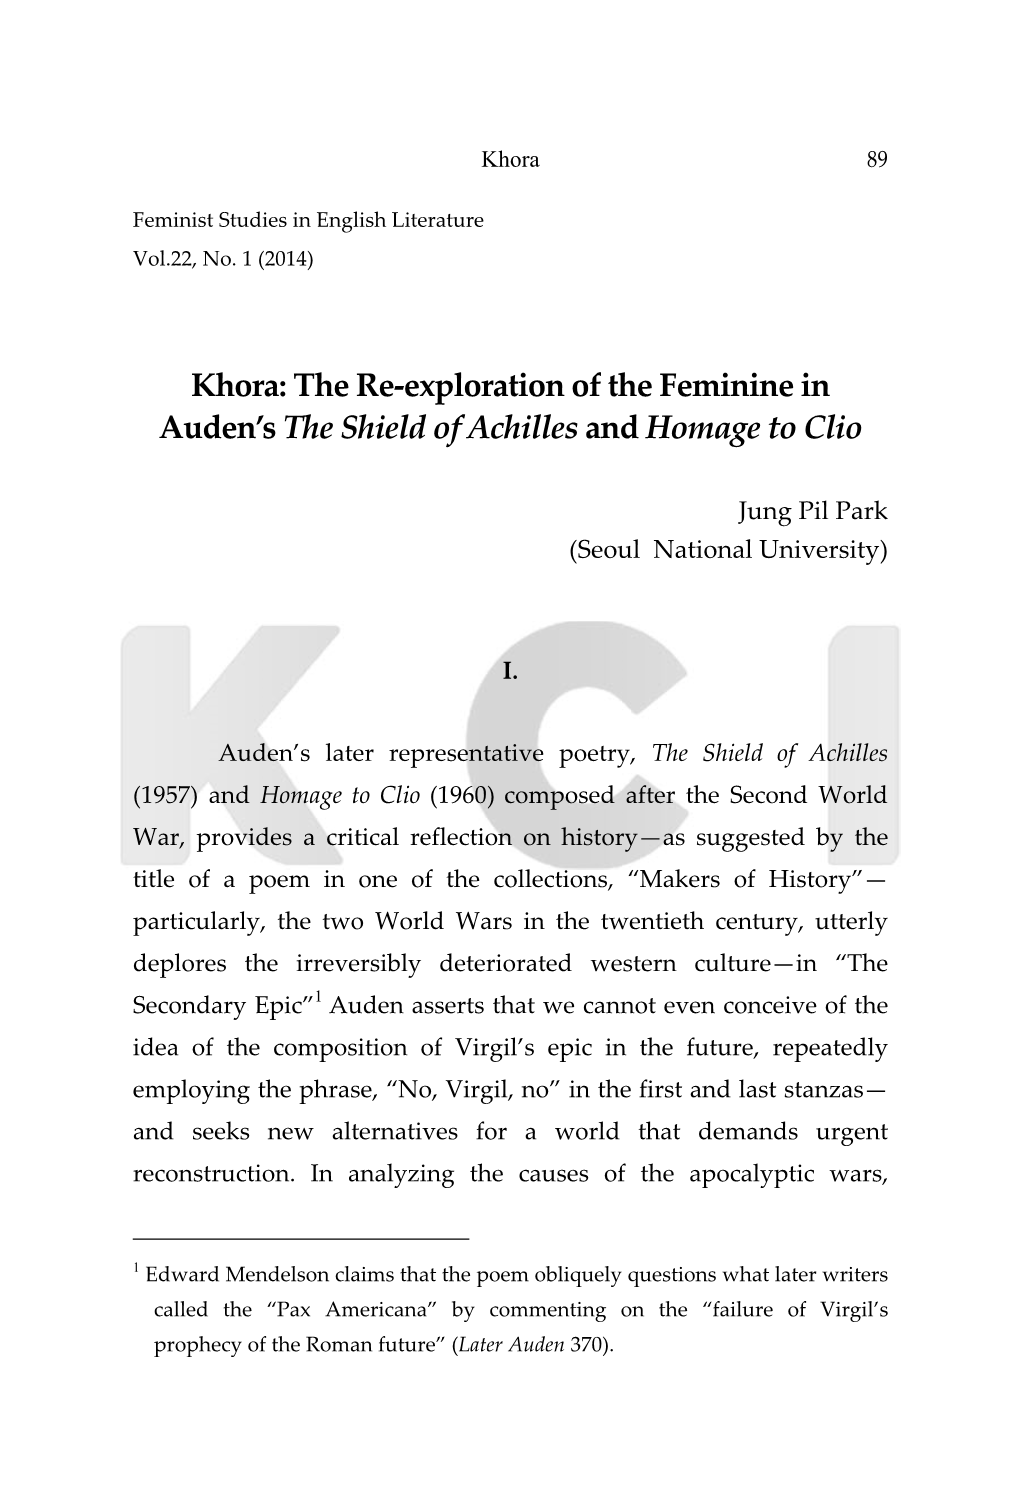 Khora: the Re-Exploration of the Feminine in Auden's the Shield Of